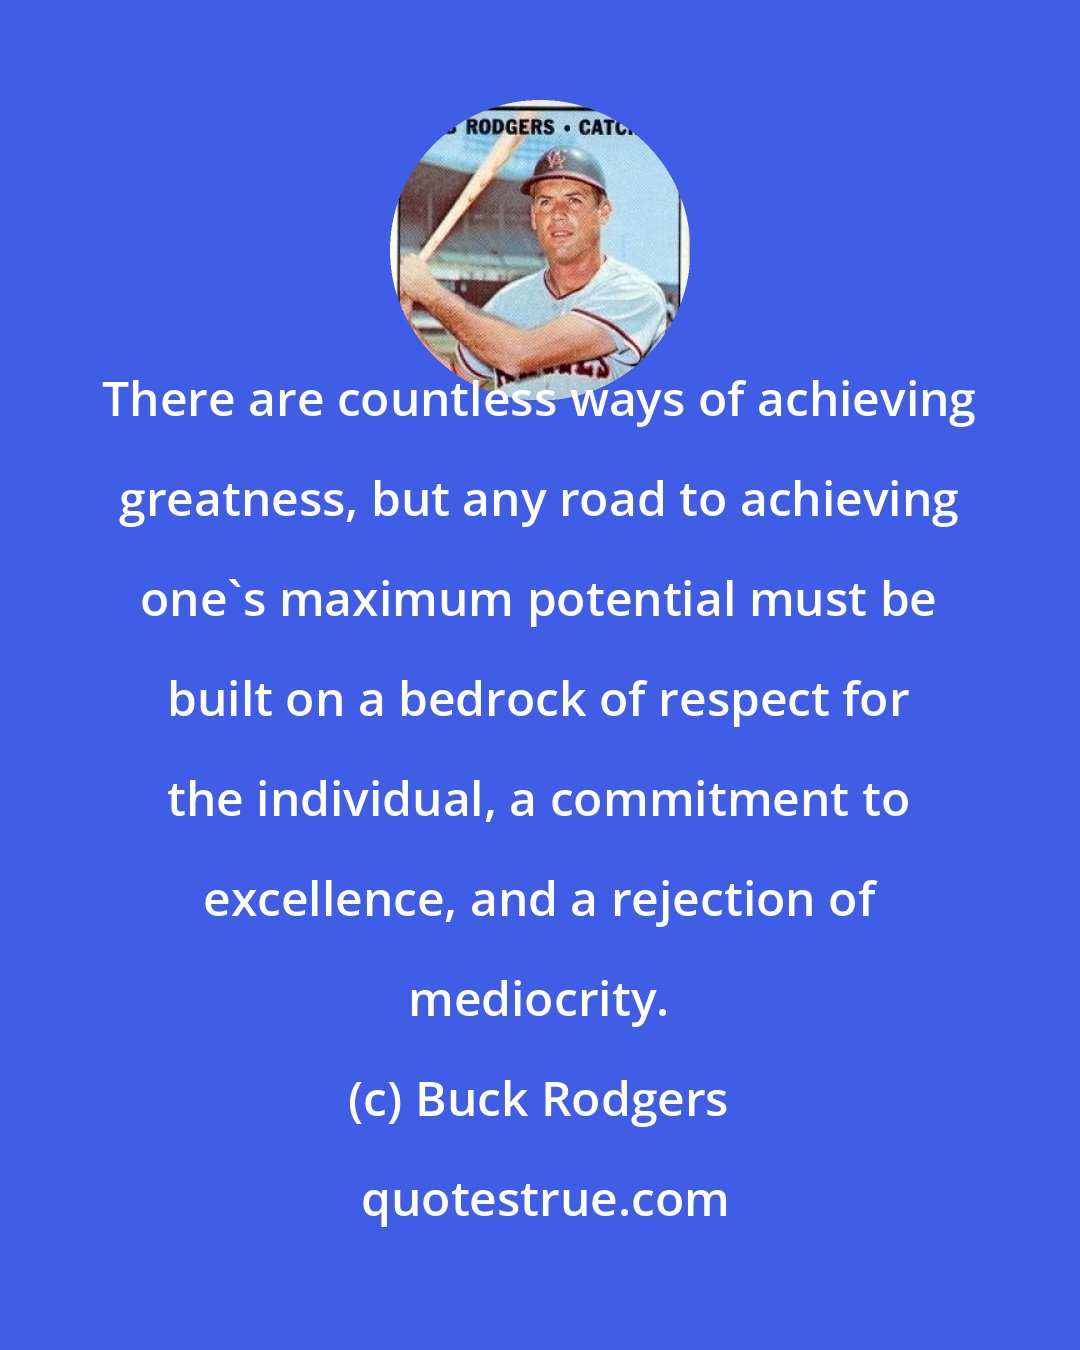 Buck Rodgers: There are countless ways of achieving greatness, but any road to achieving one's maximum potential must be built on a bedrock of respect for the individual, a commitment to excellence, and a rejection of mediocrity.